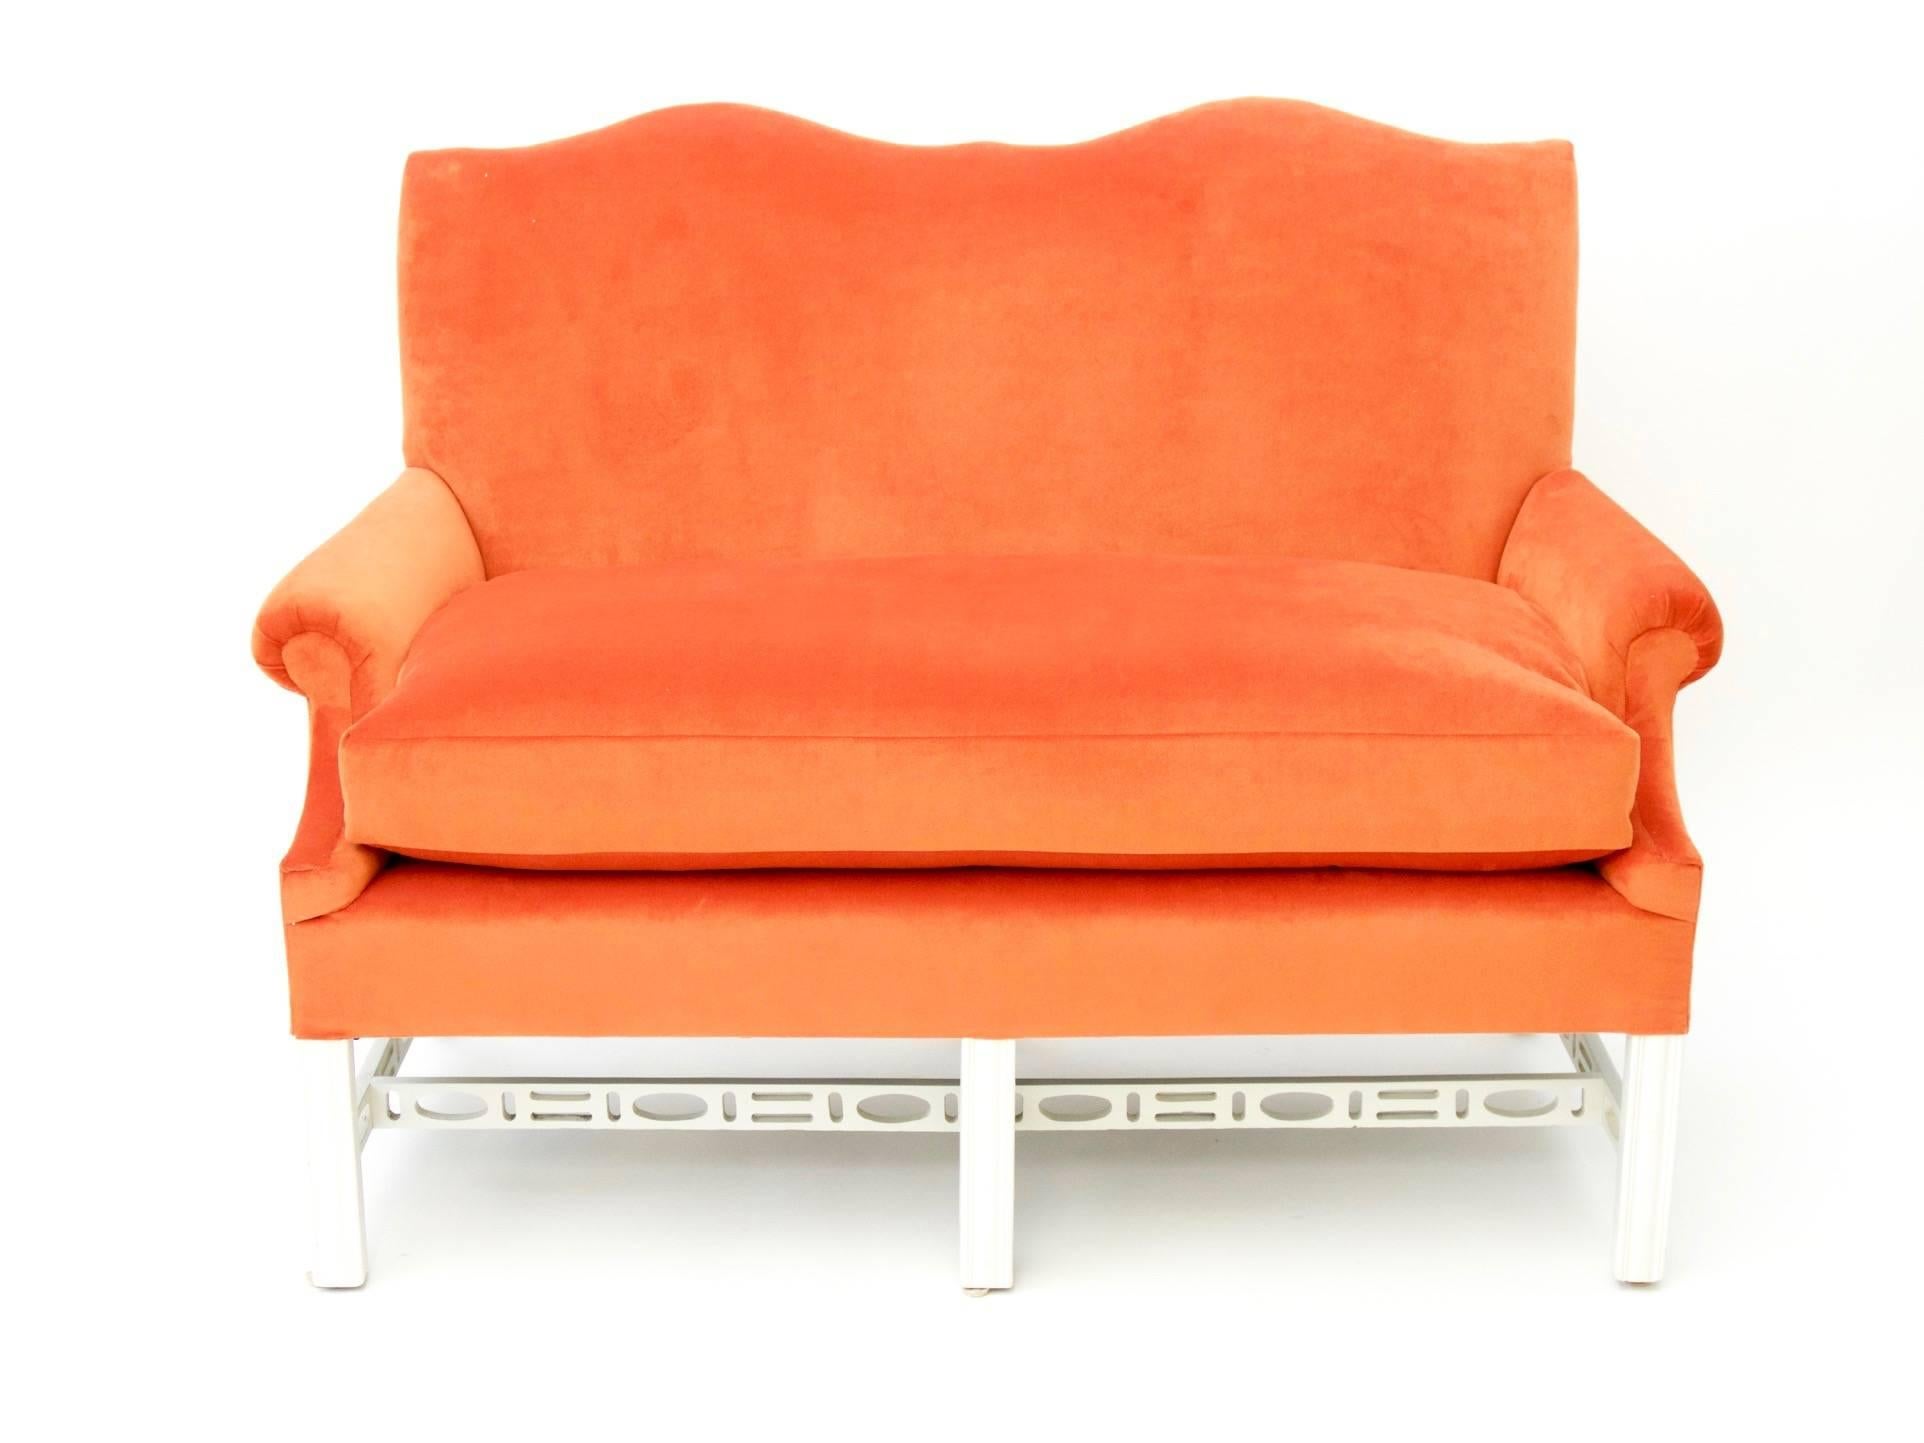 Vintage Settee, Chippendale-style, circa 1900s, newly upholstered in Tangerine Velvet.  Newly painted legs & stretcher. Single "Bench" Cushion interior is a down & feather wrap over foam core (new).

